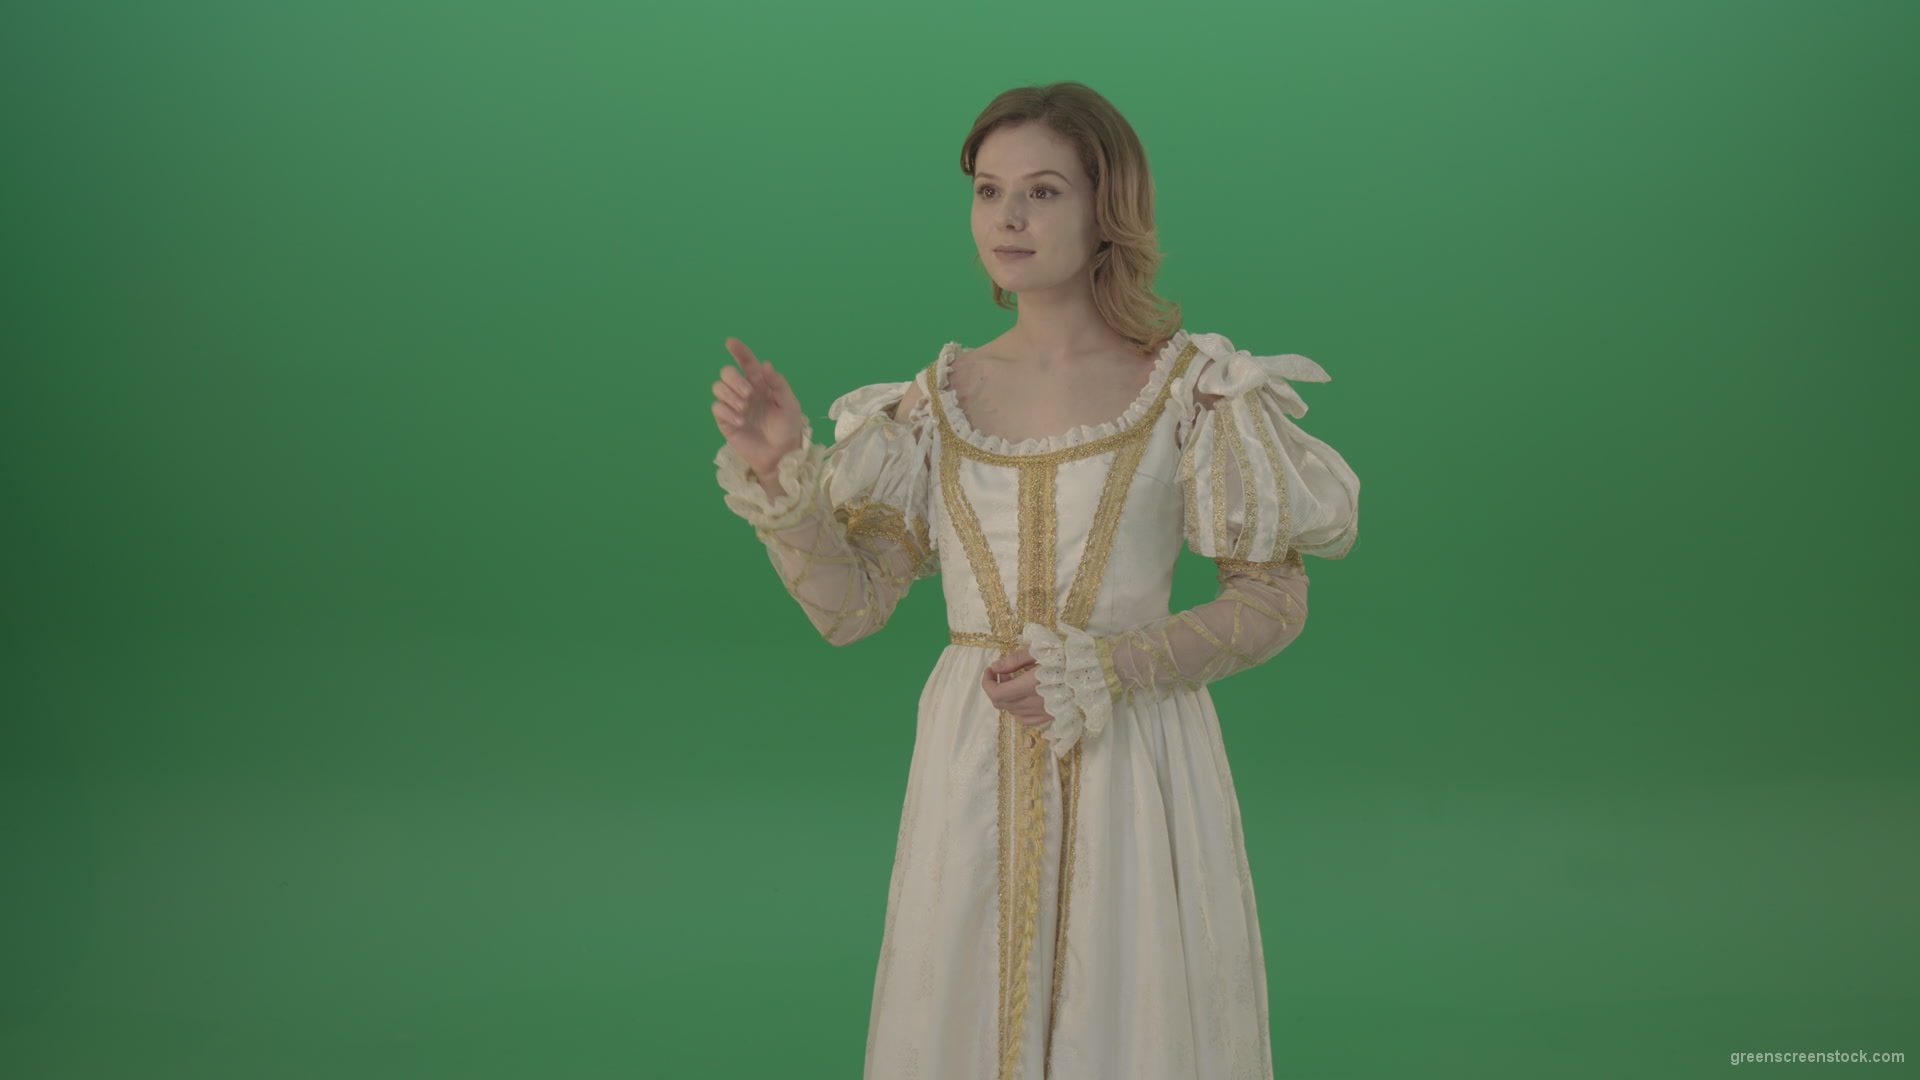 Girl-flips-a-virtual-screen-dressed-in-a-medieval-costume-isolated-on-green-screen_002 Green Screen Stock